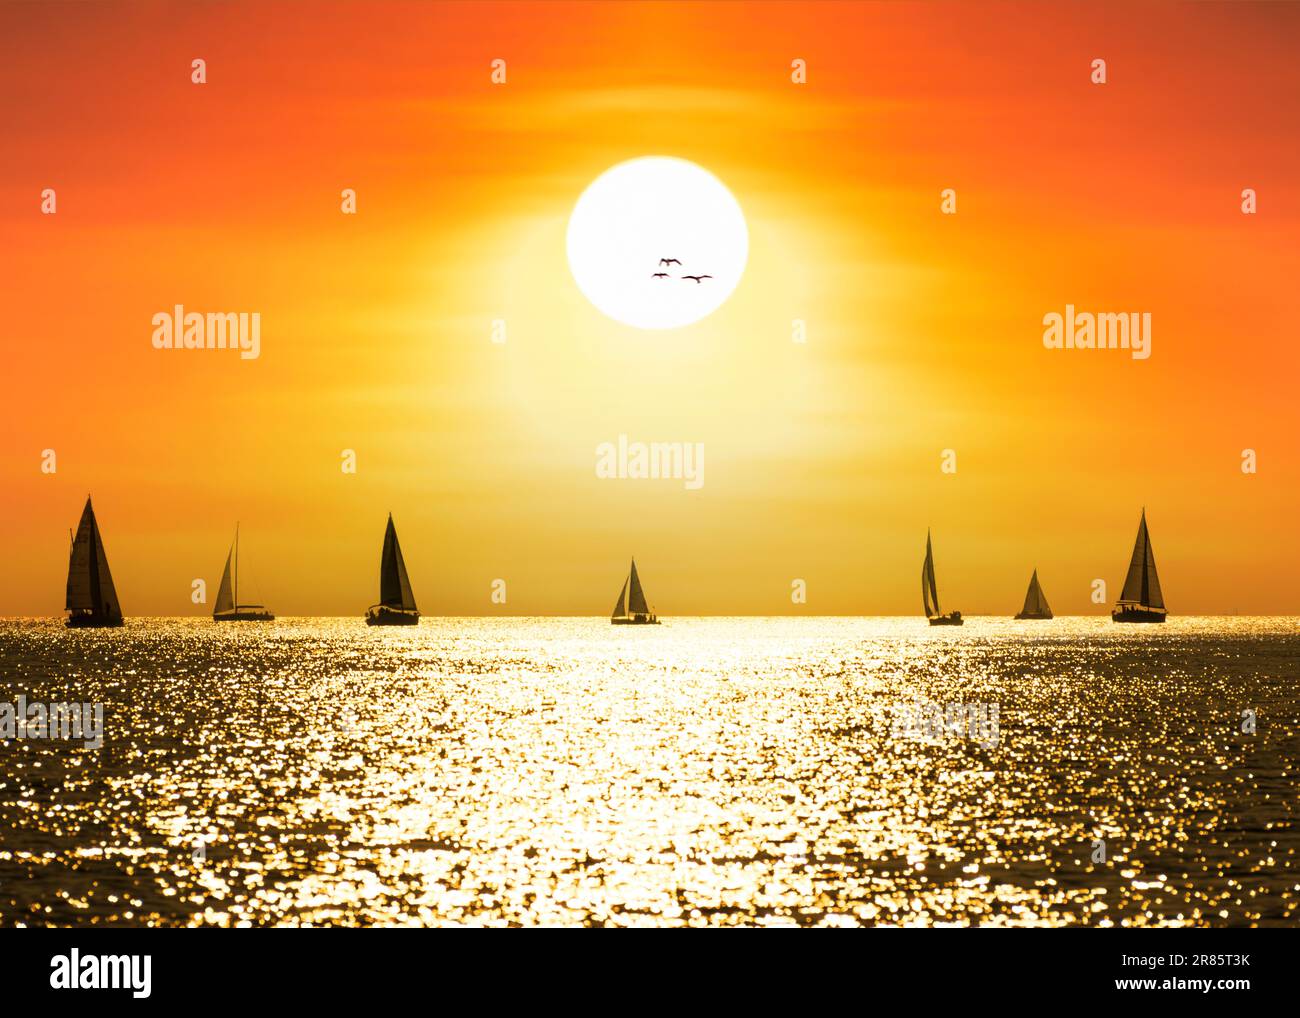 Silhouette view of sailboats at sunset. holiday background Stock Photo